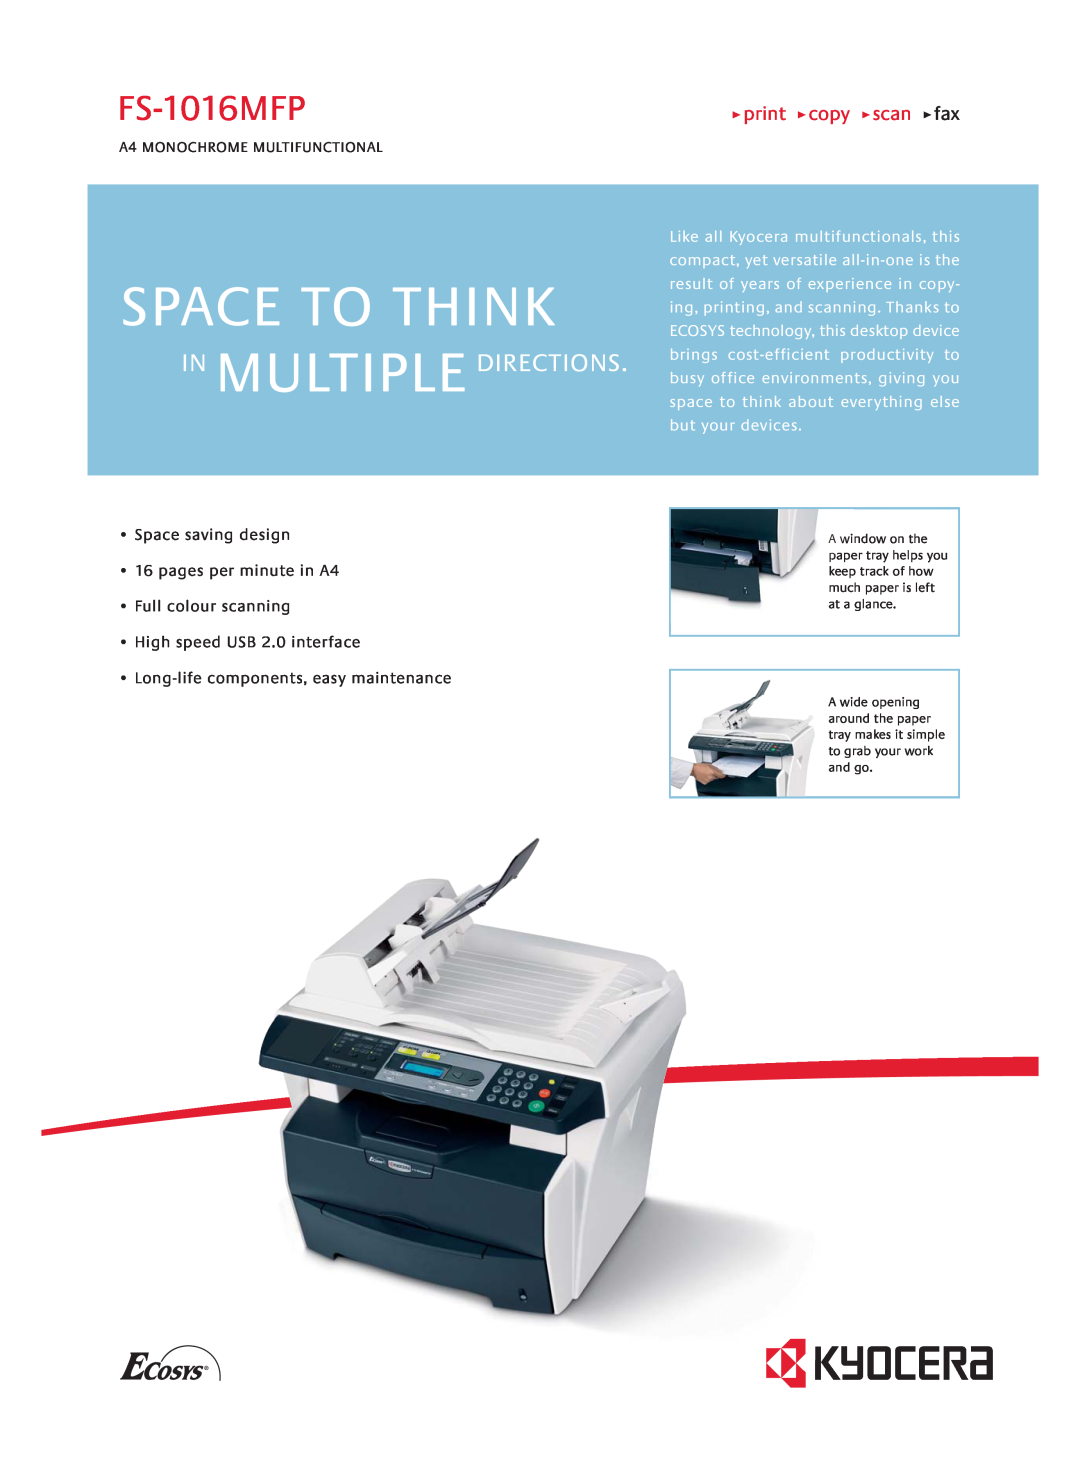 Kyocera FS-1016MFP manual Space To Think, In Multiple Directions, print copy scan fax 